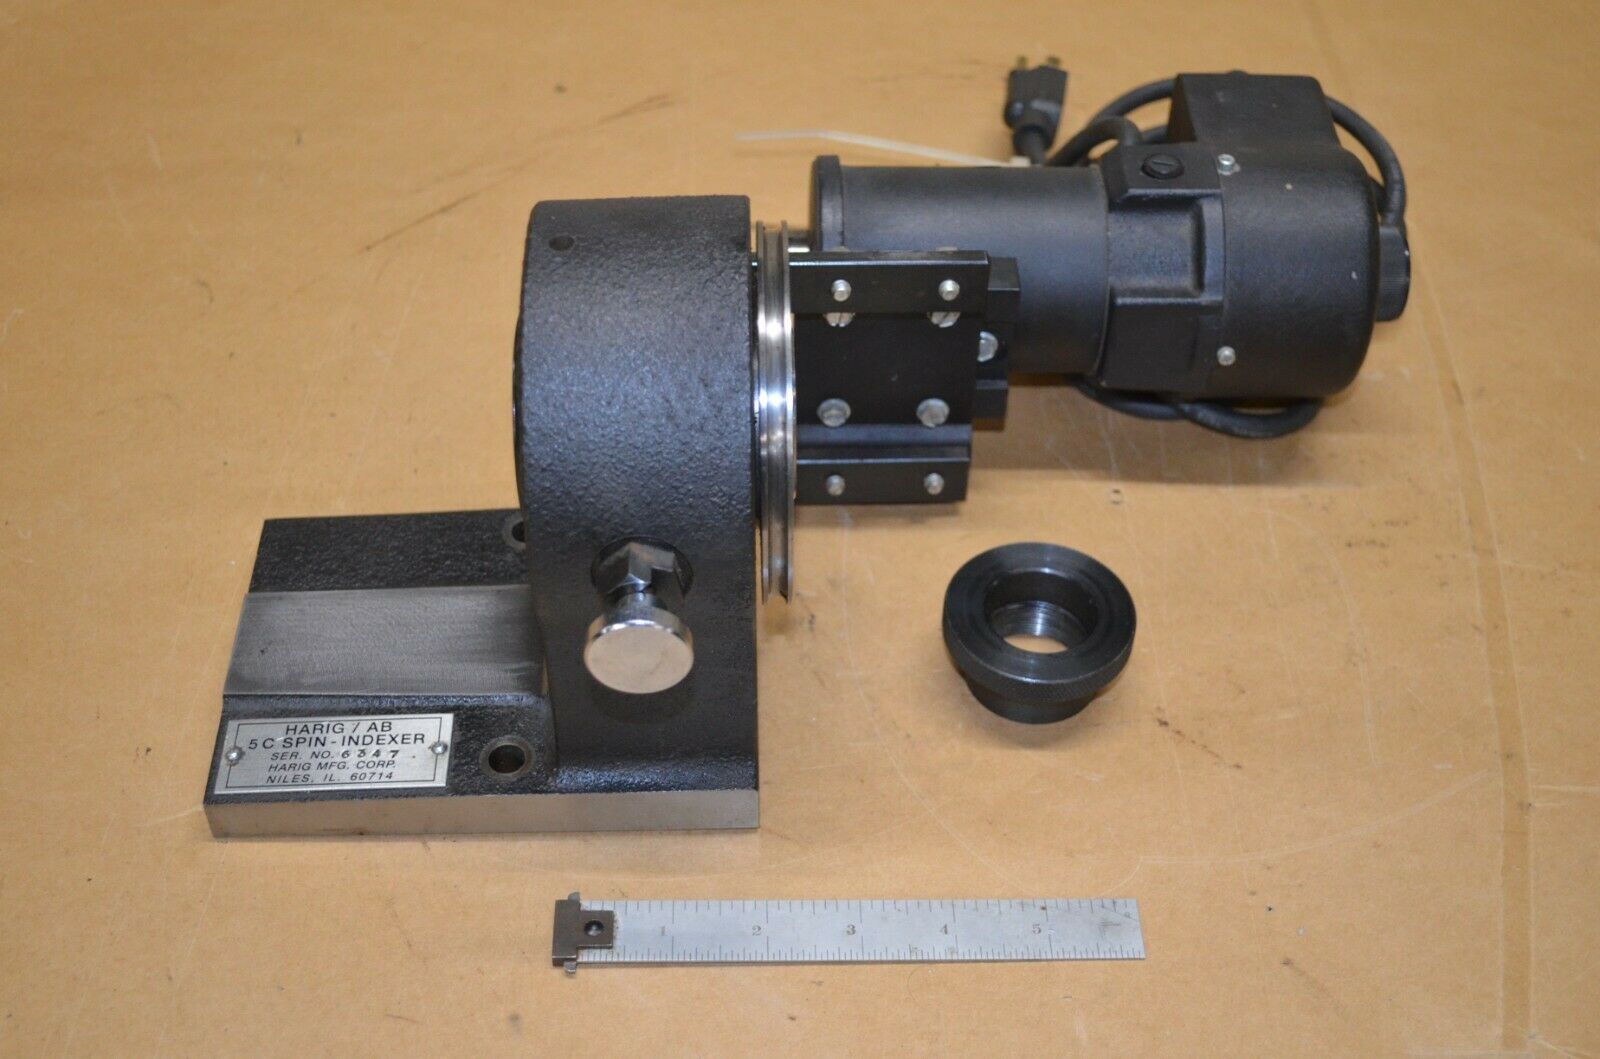 Harig / Ab 5c Motorized Variable Speed Spin Indexer